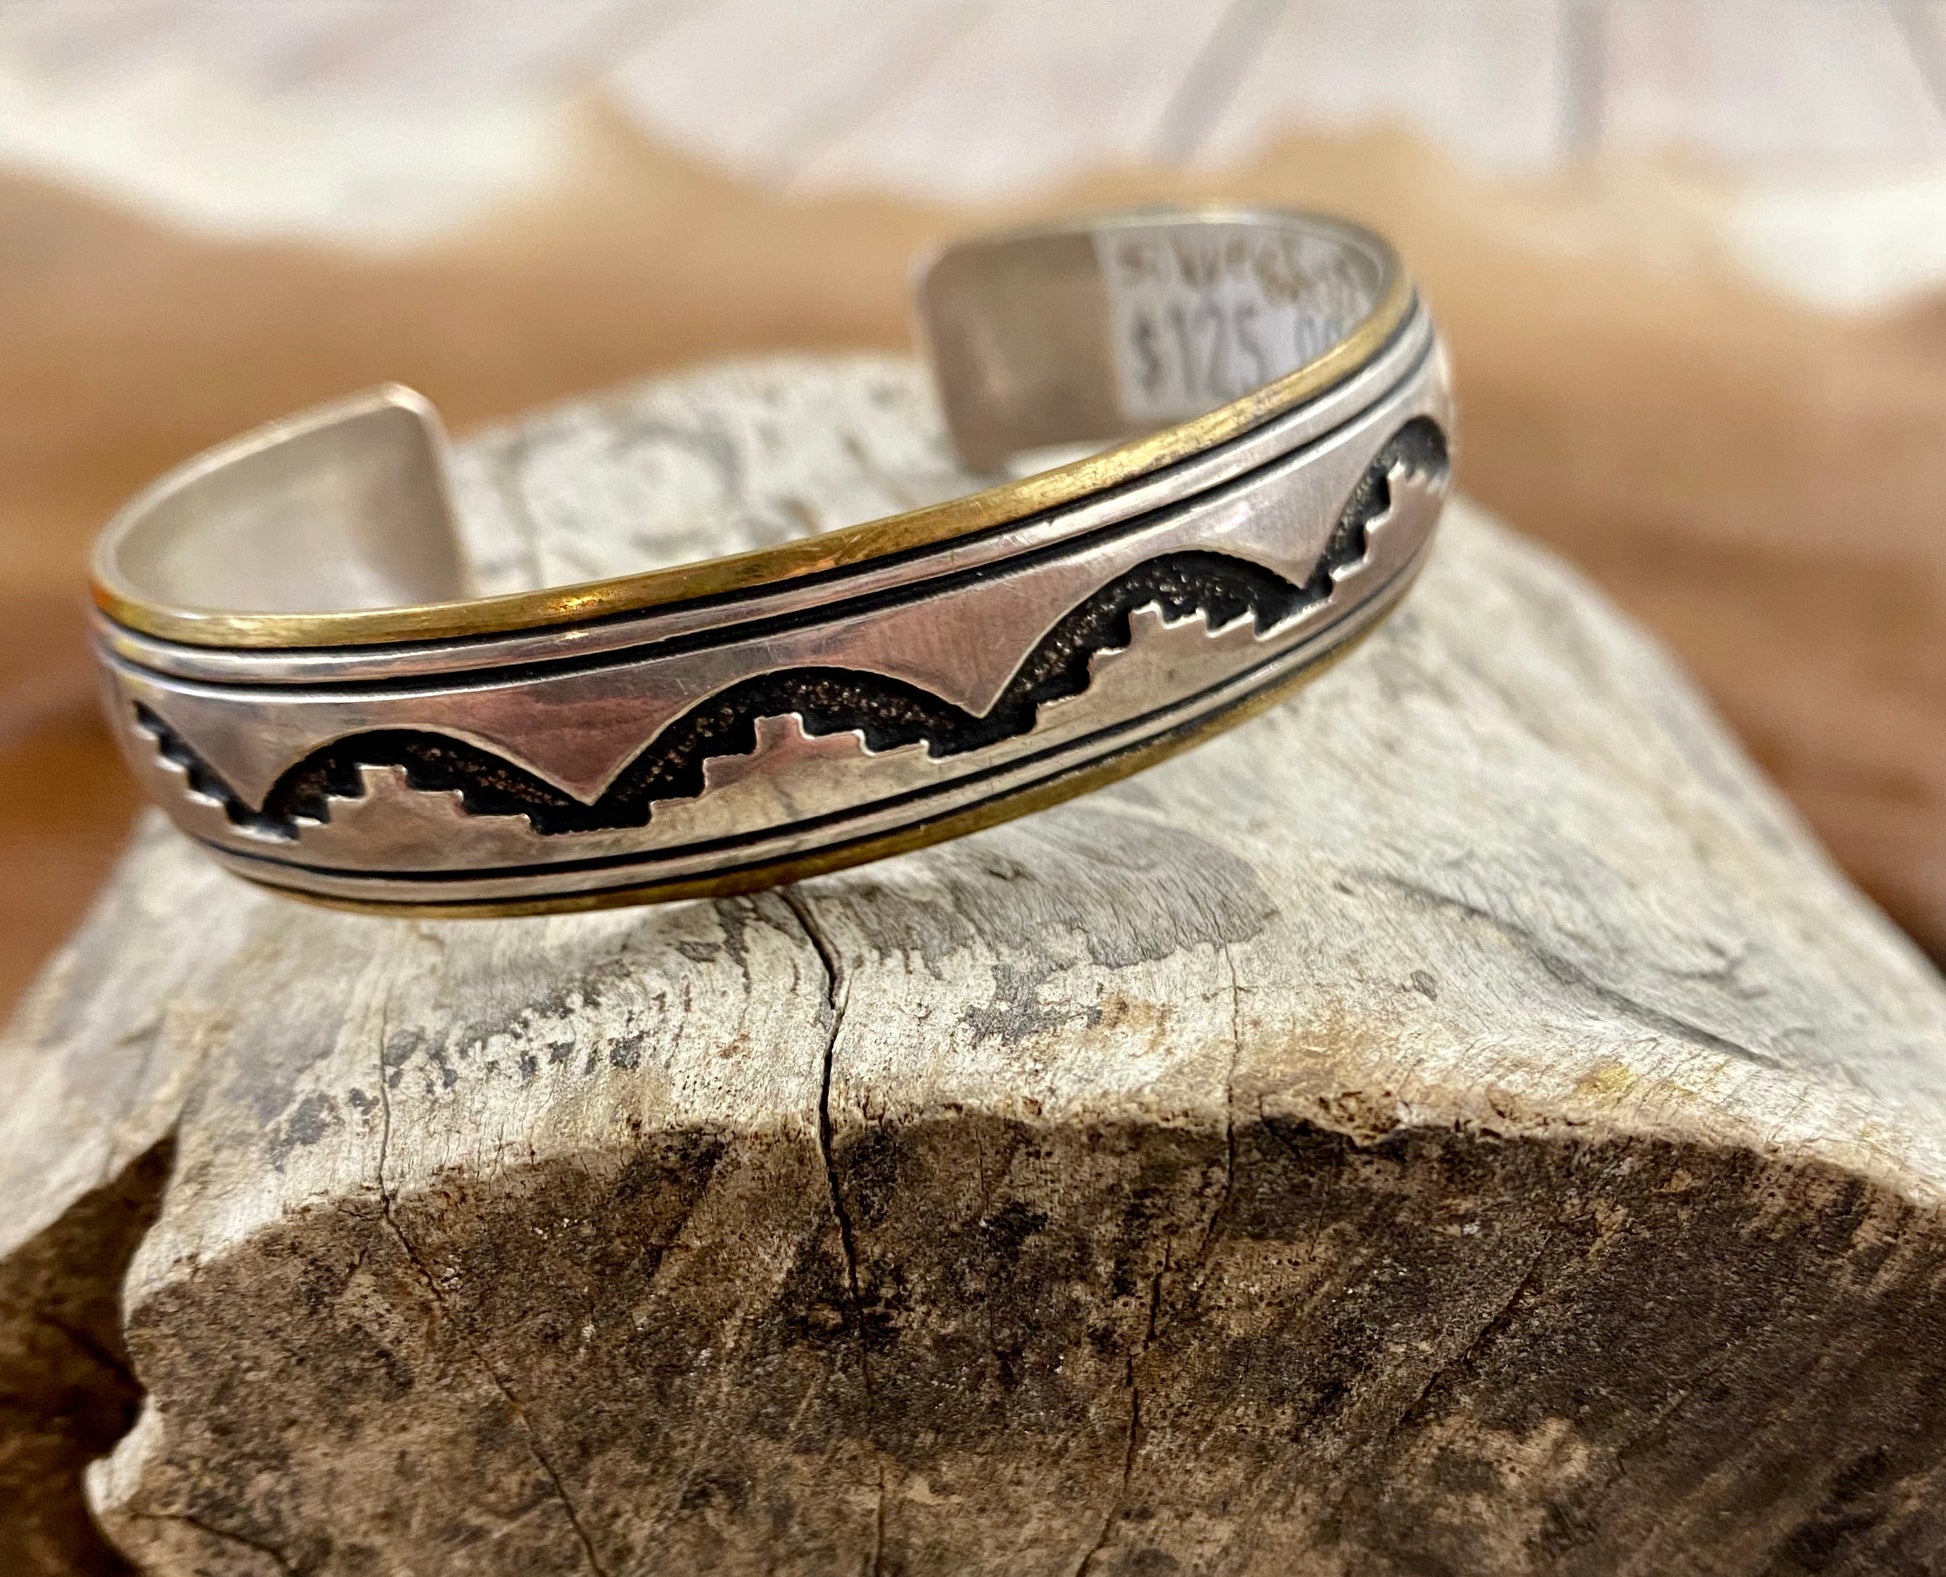 This collection of Navajo-made jewelry includes pieces of original Tommy Singer jewelry pieces. Stamped sterling and signed with Tommy Singer jewelry hallmark. Add a piece of Tommy Singer Native American jewelry to your jewelry collection today! Beautiful Tommy Singer jewelry for sale. Tommy Singer Navajo jewelry is the perfect gift!